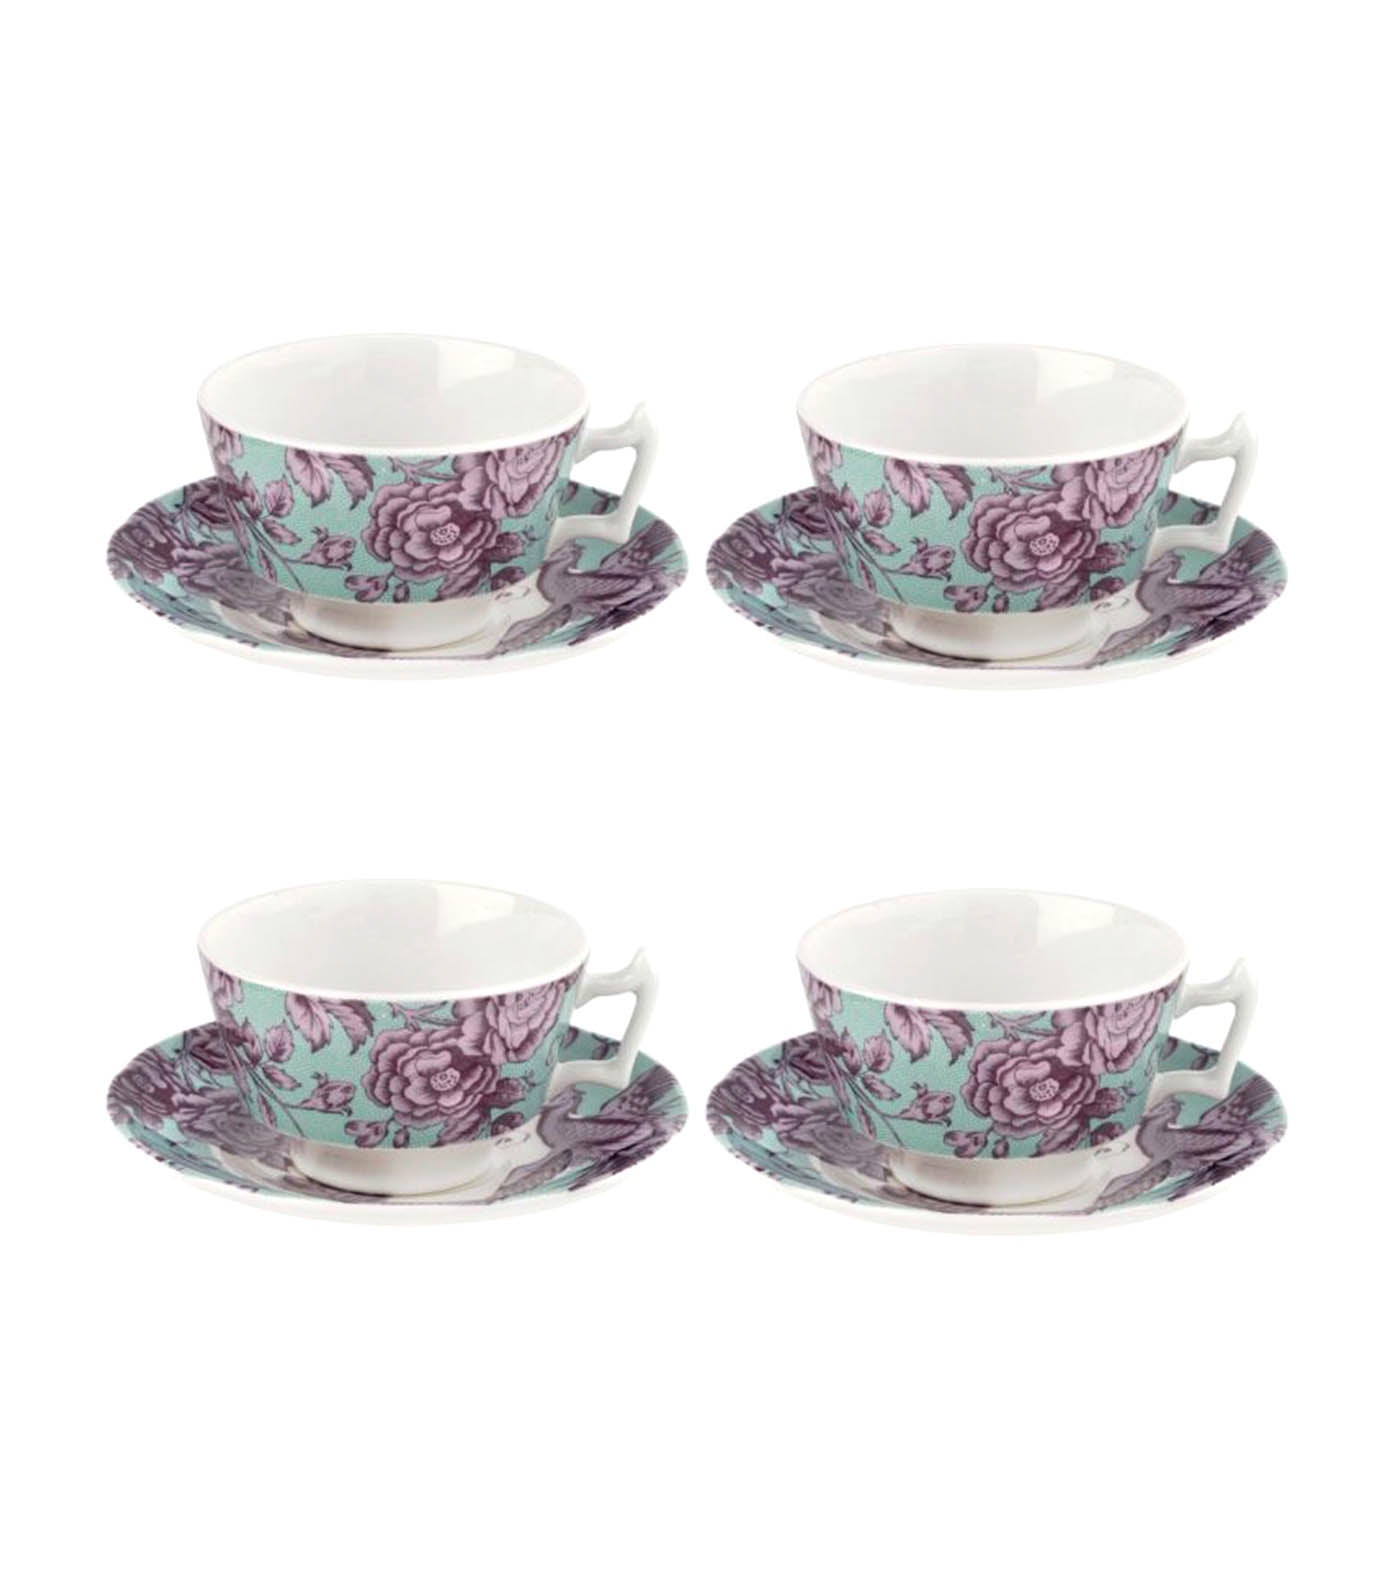  Spode Kingsley Collection - Teal